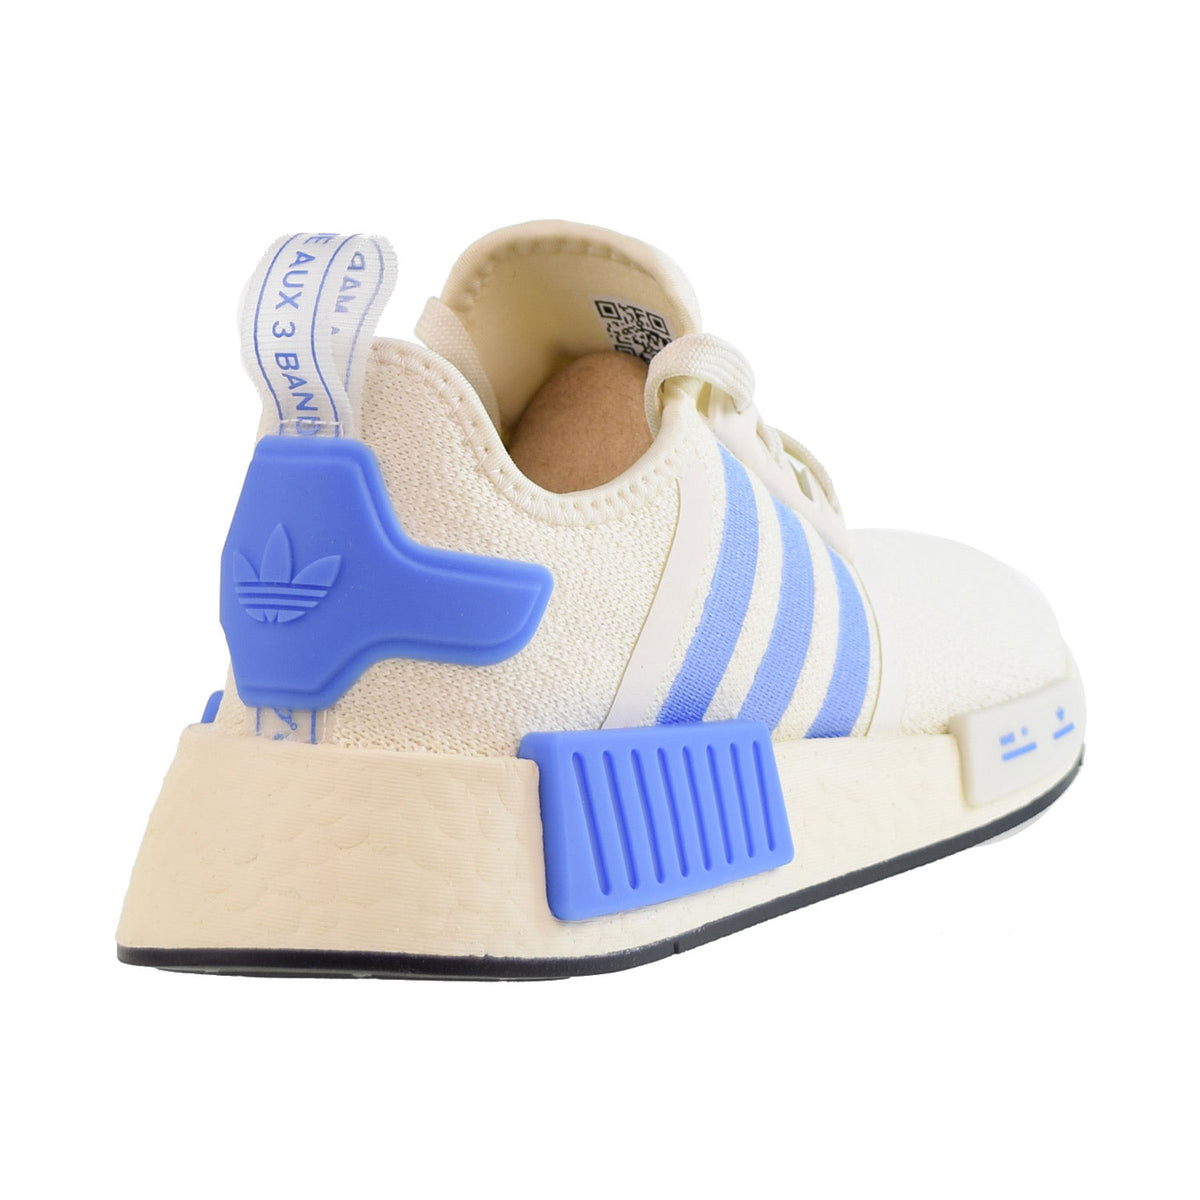 Adidas NMD_R1 Women's Shoes Off White-Blue Fusion-Core Black